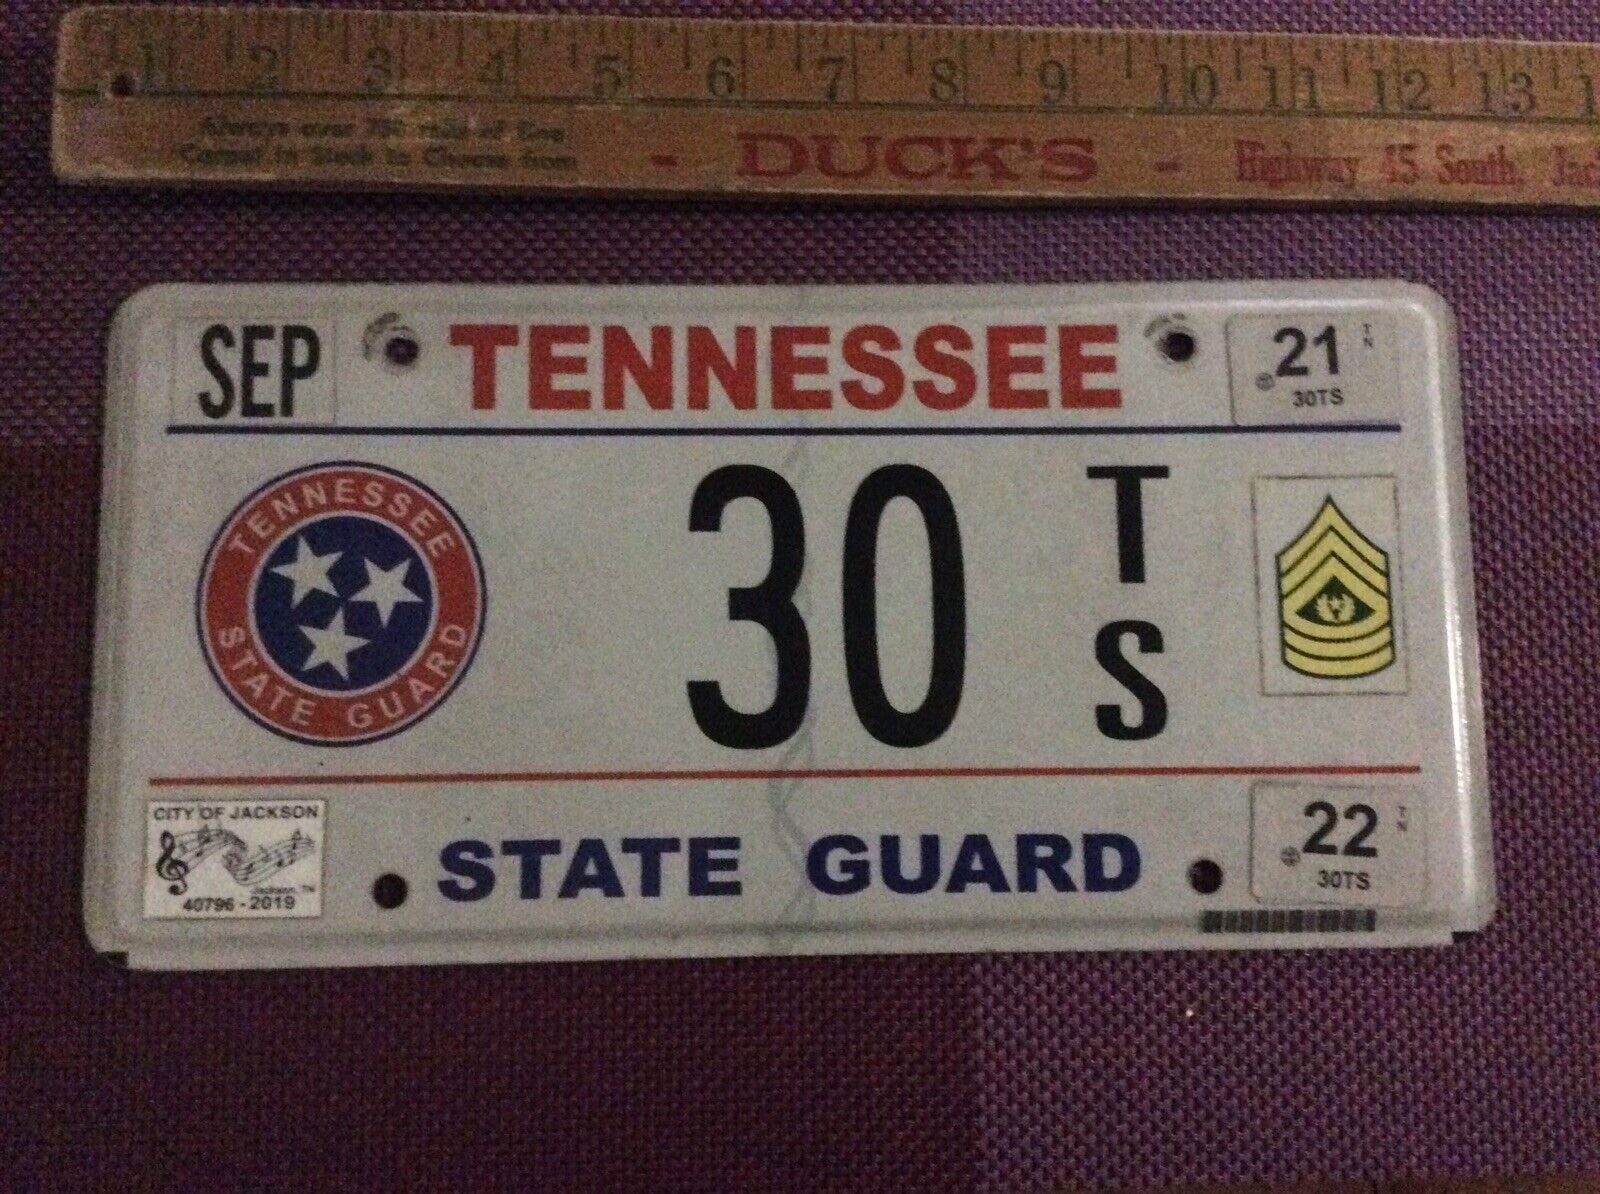 2019 Tennessee State Guard Tennessee License Plate # 30 TS Very Low Number